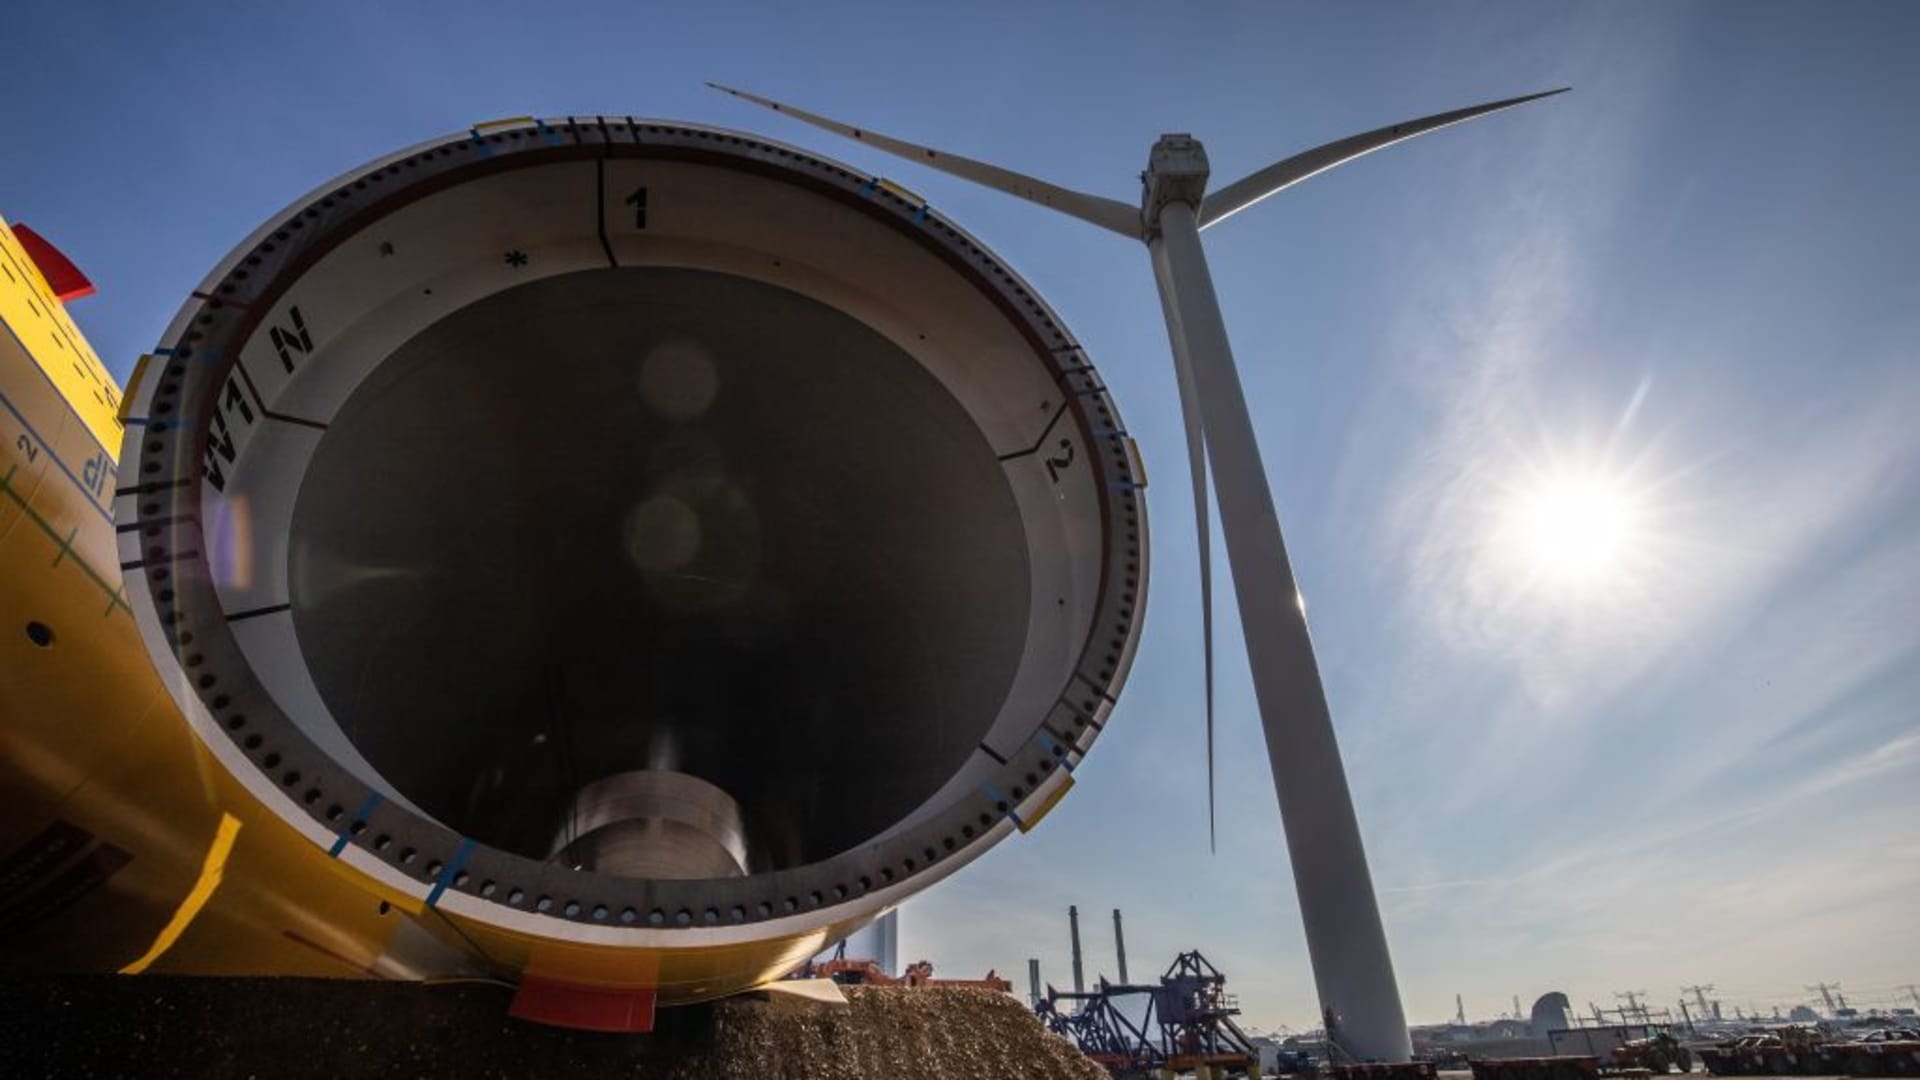 GE hoping to 3D print concrete components for wind turbines so it can save on transportation costs